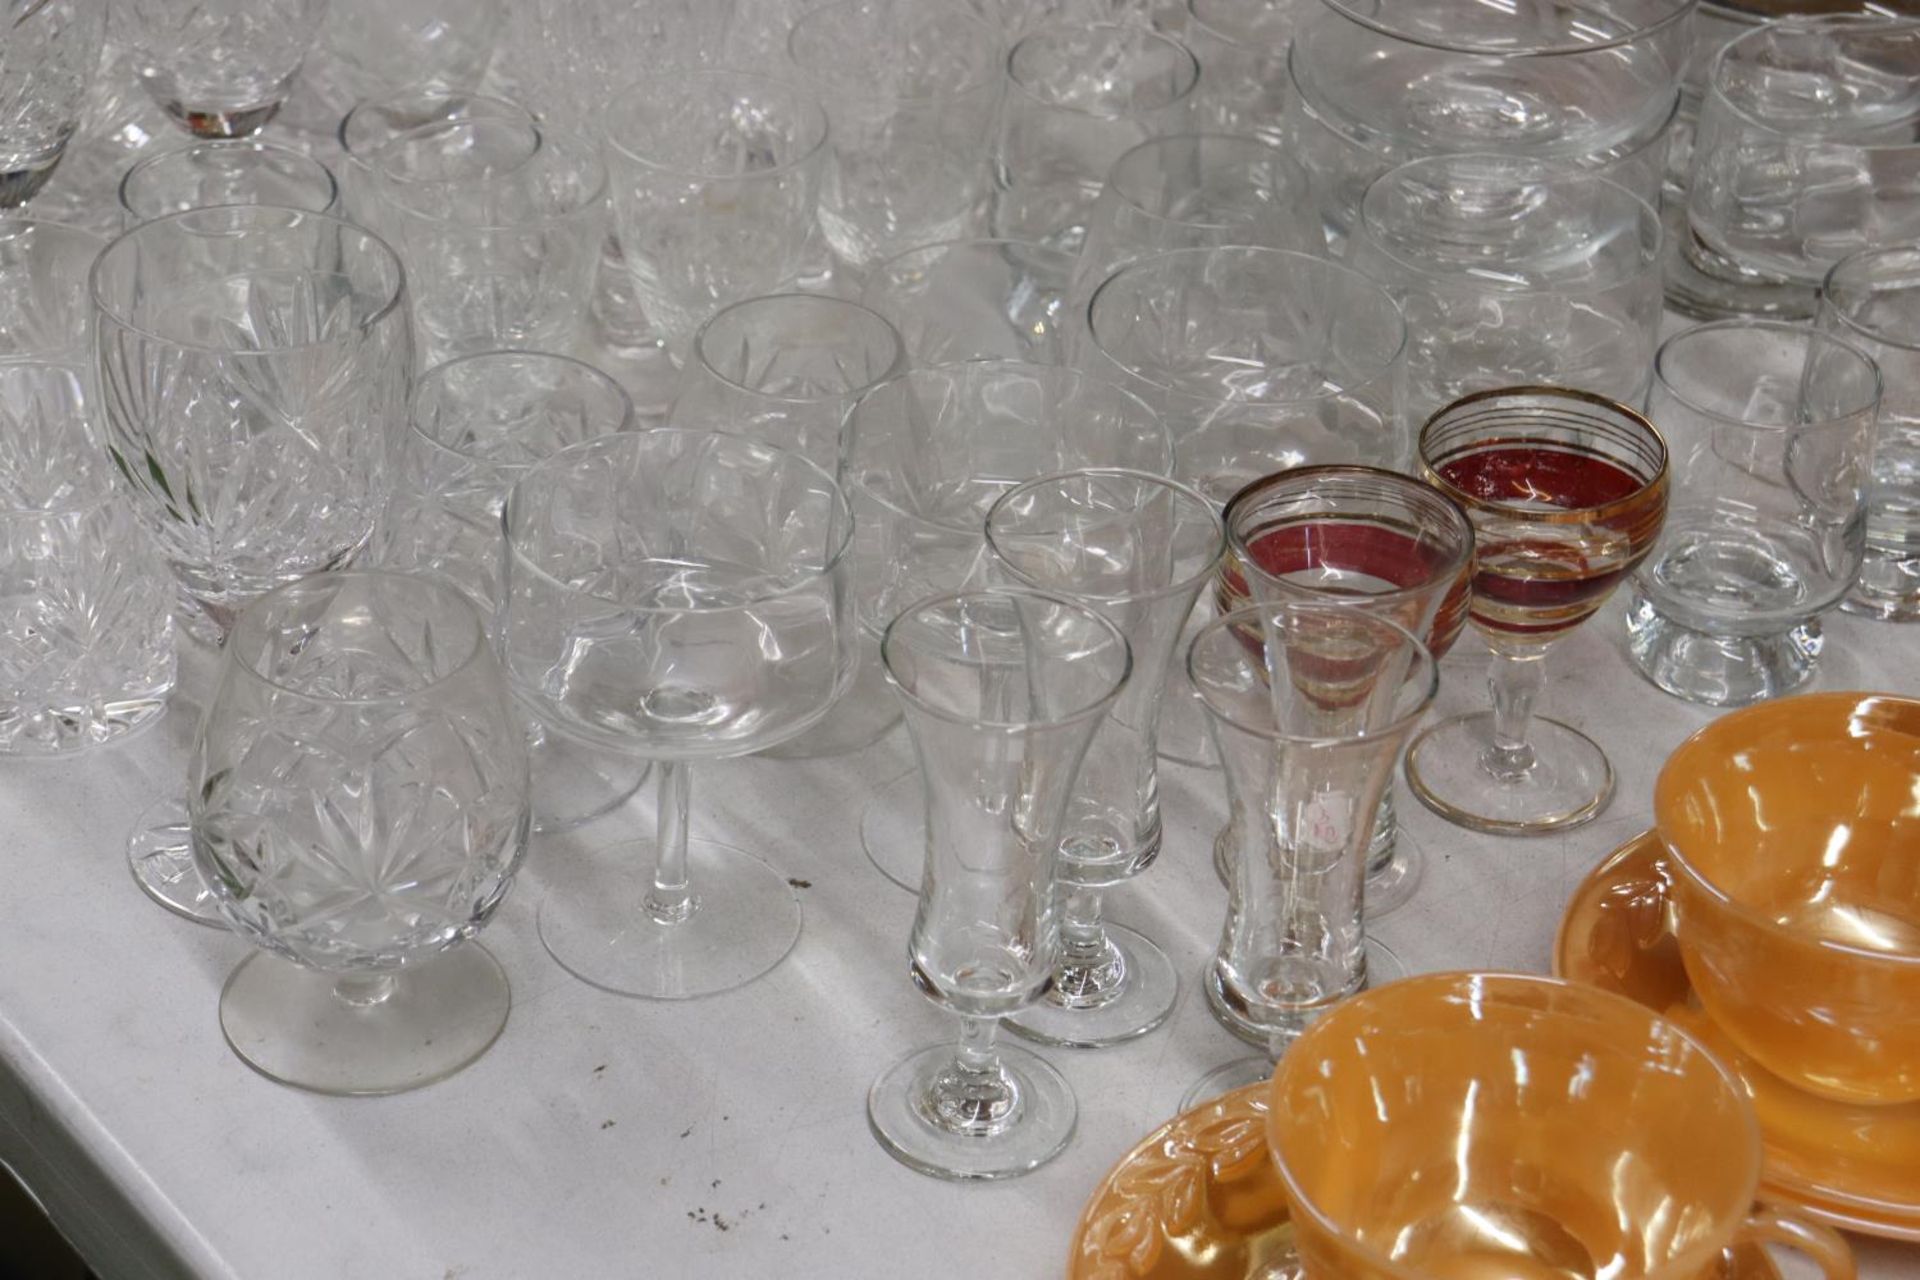 A LARGE QUANTITY OF GLASSES TO INCLUDE CHAMPAGNE FLUTES, WINE, SHERRY, TUMBLERS, DESSERT BOWLS, ETC - Image 4 of 6